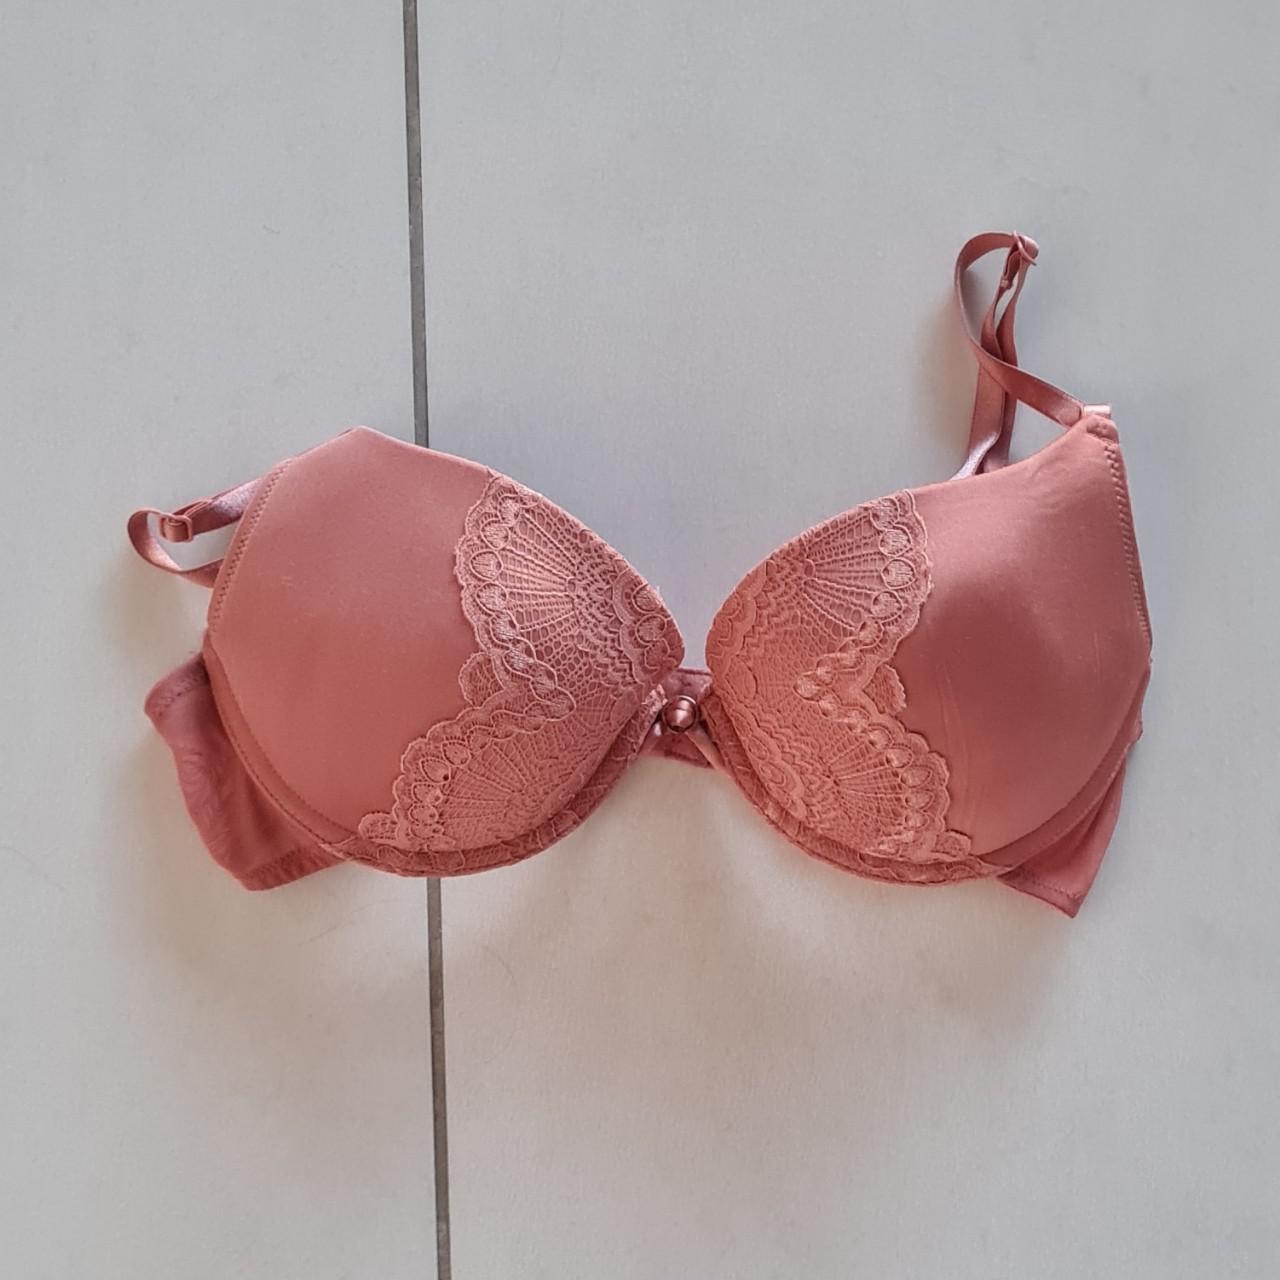 NWOT meundies bralettes Size xs Sizing pictured above - Depop